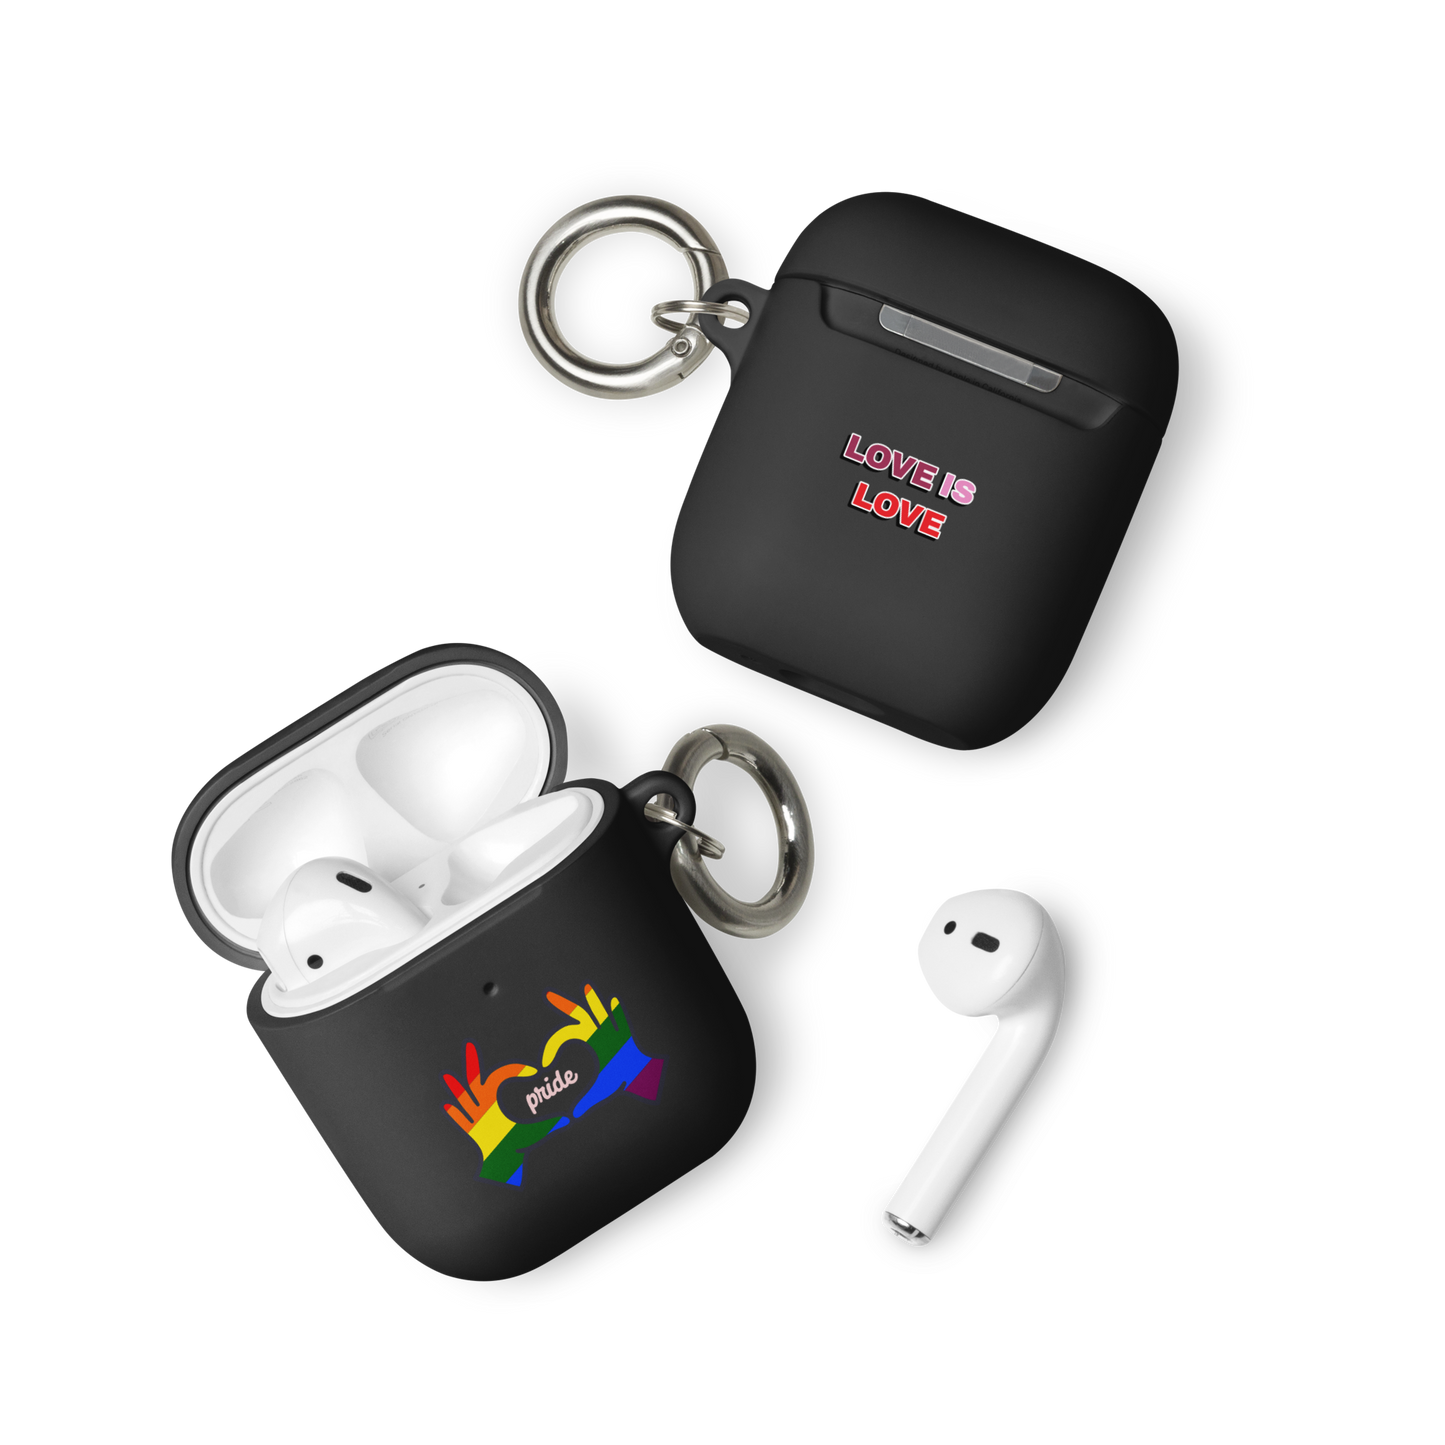 "Love is love" Pride AirPods® Case